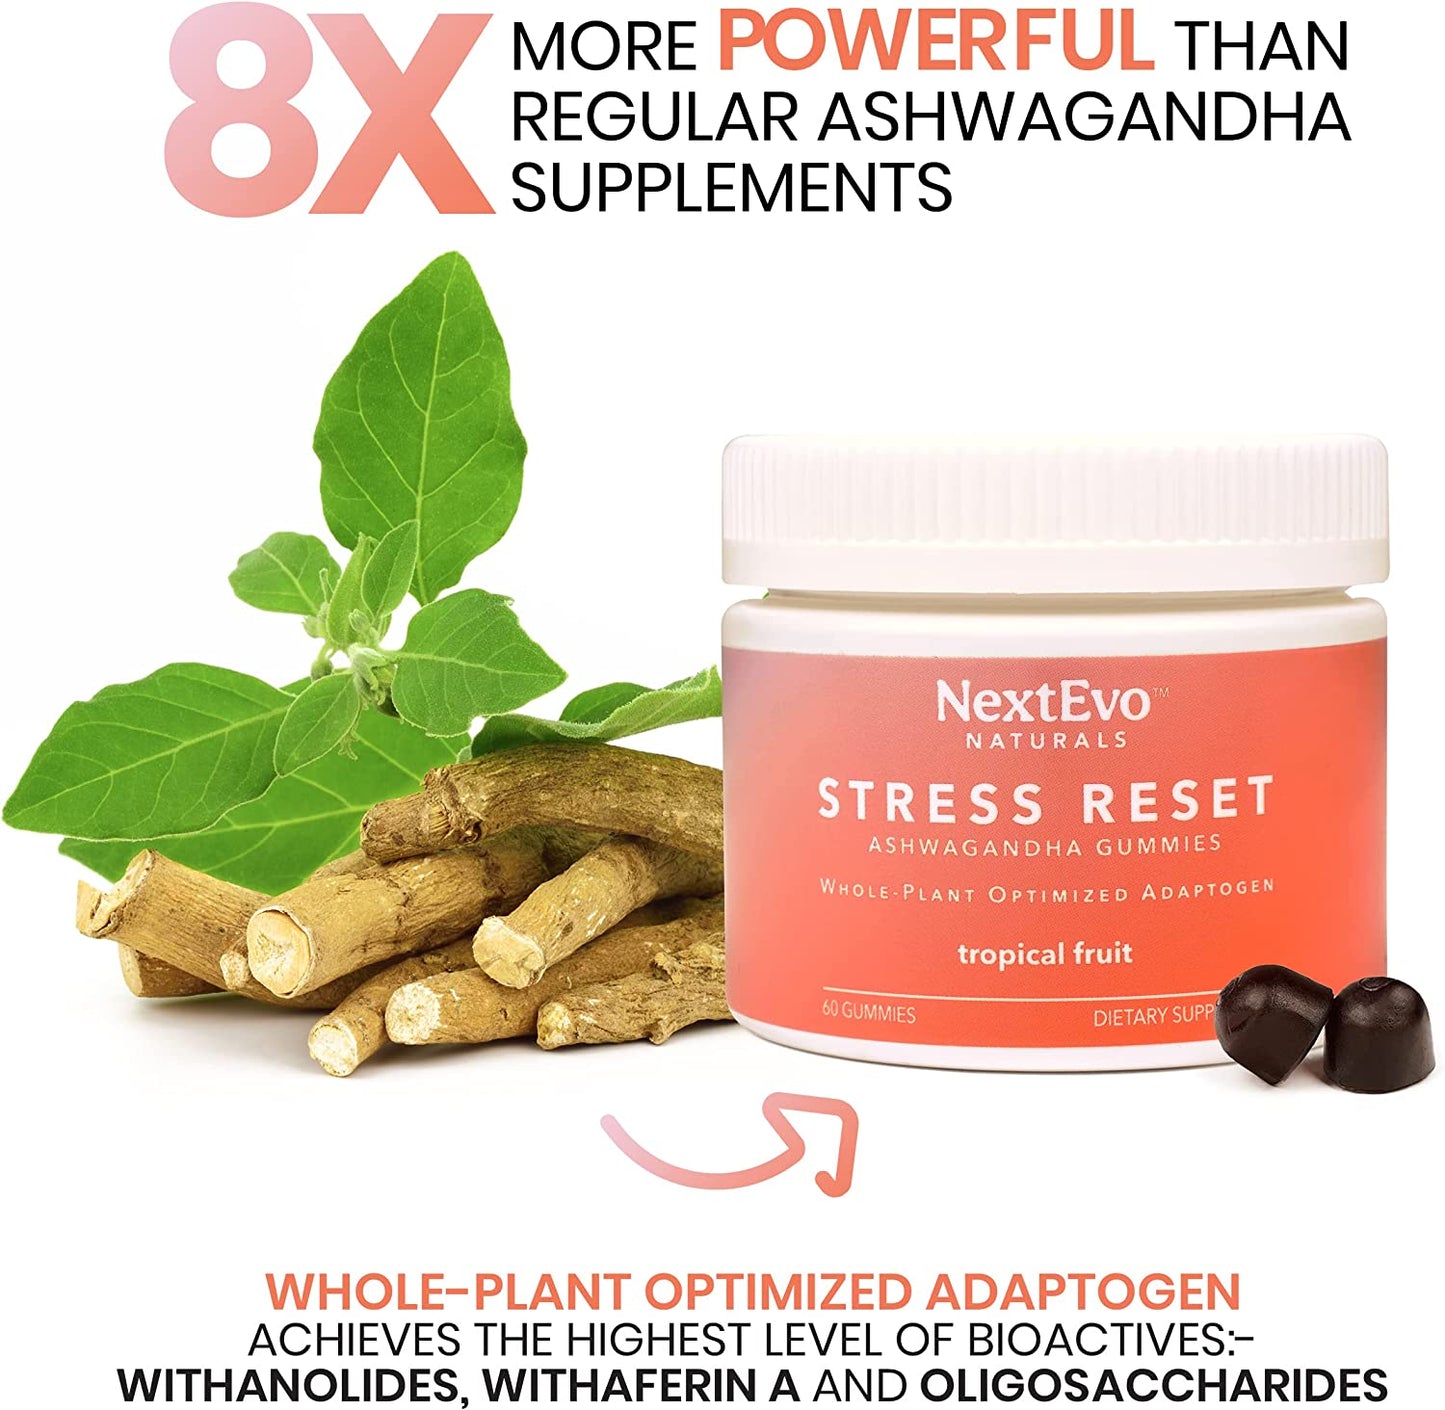 New Naturals Ashwagandha Stress Relief Gummies with a High Potency 8X More Powerful Patented Ashwagandha Root & Stem Blend, Tropical Fruit Flavored, 60 Stress Reset Gummies.